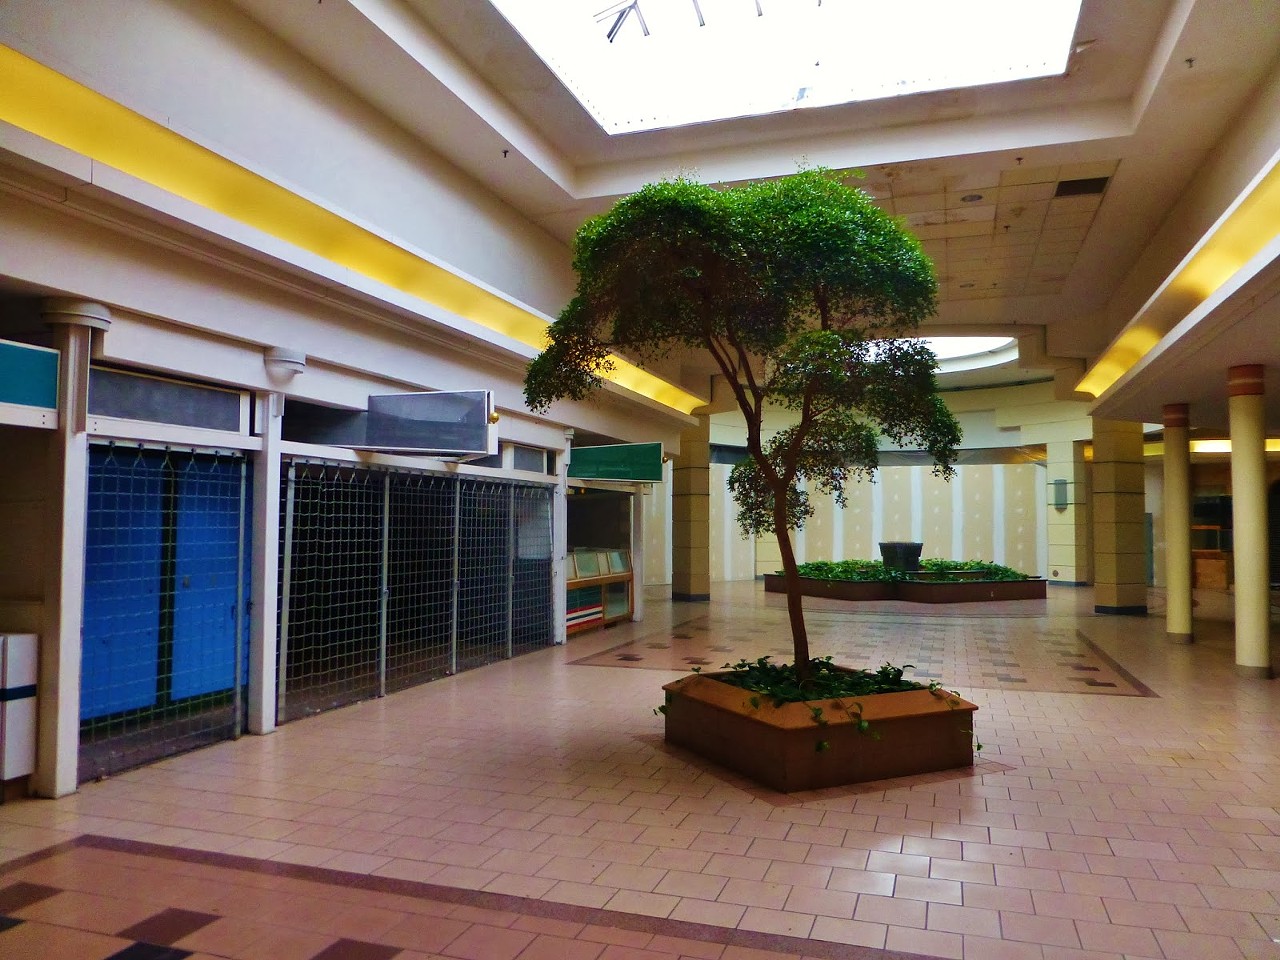 15 Photos of the Abandoned Canton Centre Mall